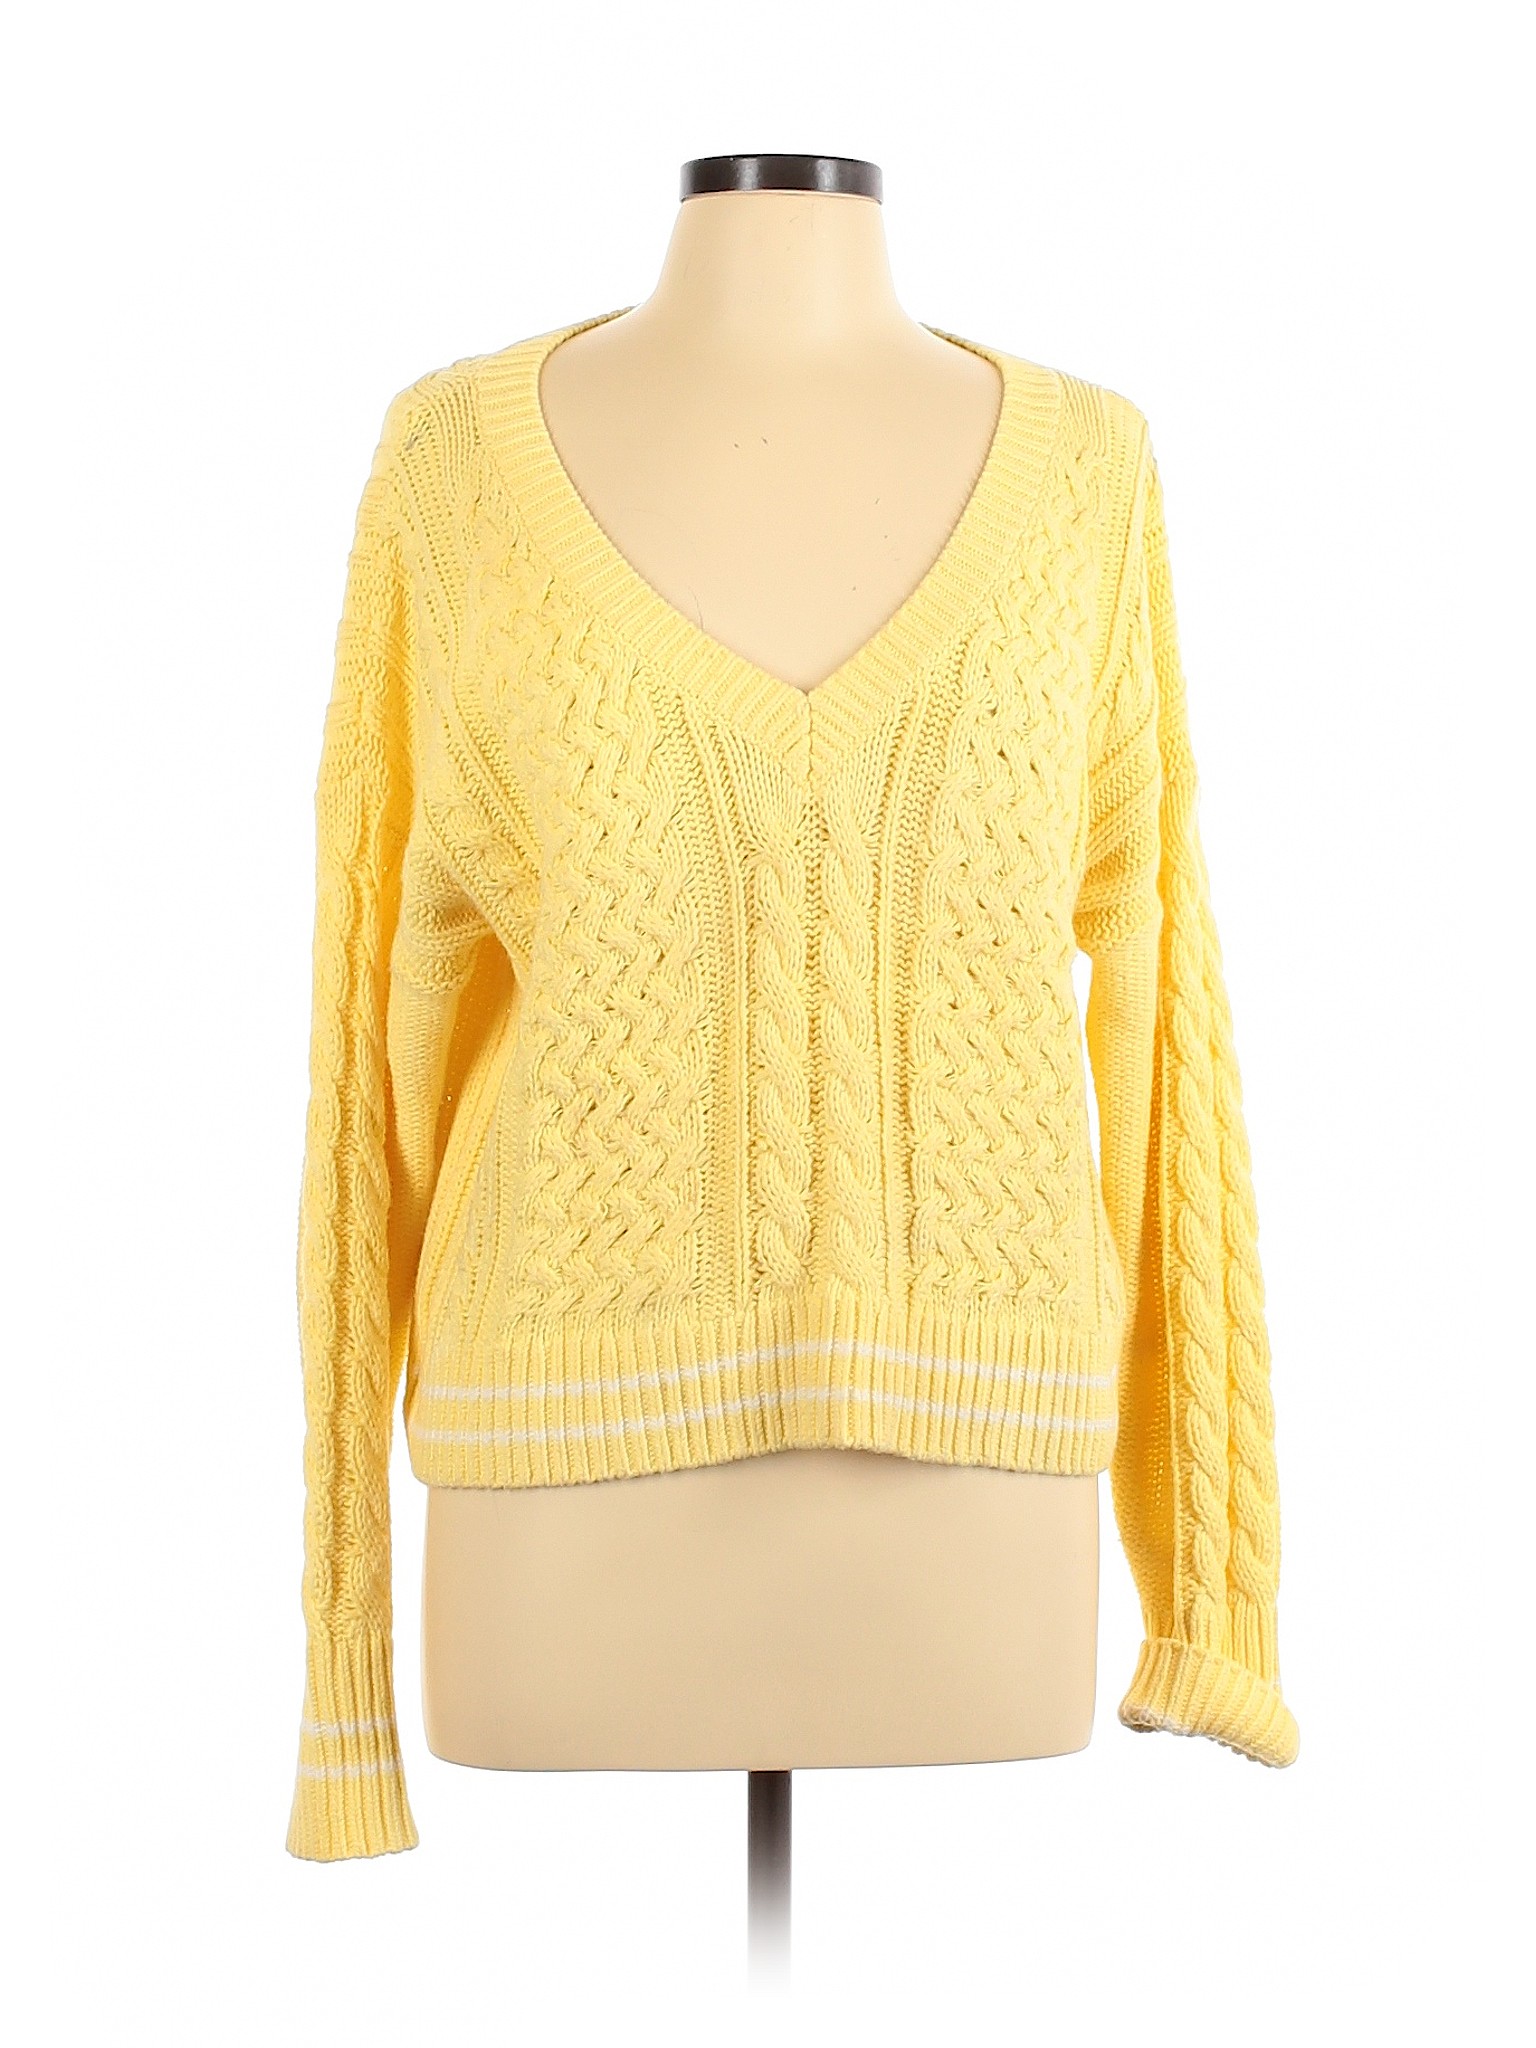 Abercrombie & Fitch Women Yellow Pullover Sweater L | eBay